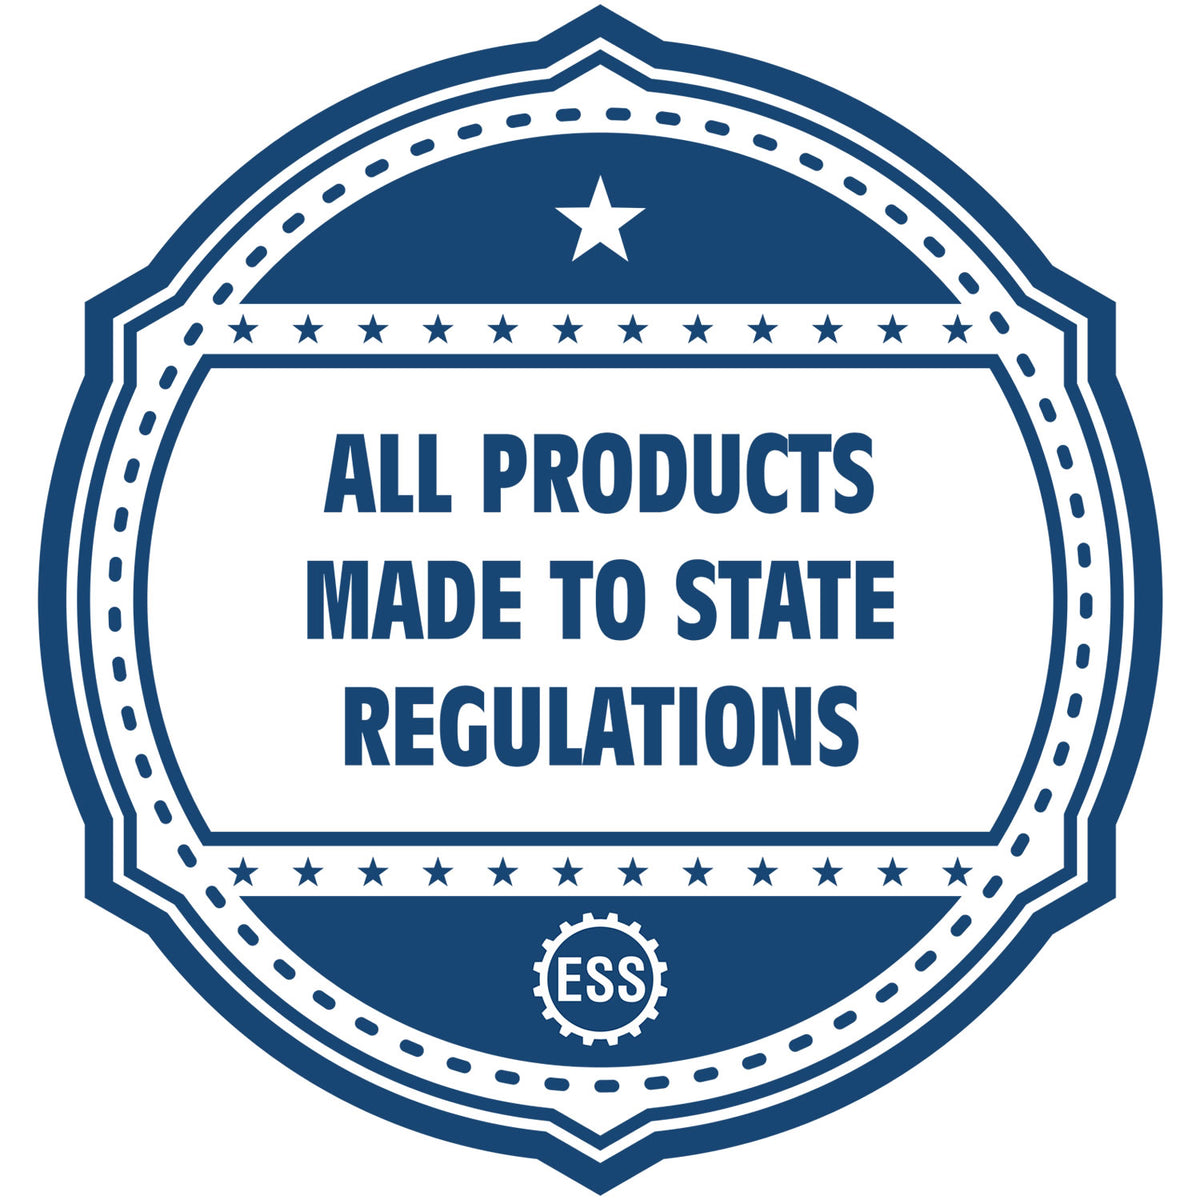 An icon or badge element for the Heavy-Duty Alaska Rectangular Notary Stamp showing that this product is made in compliance with state regulations.